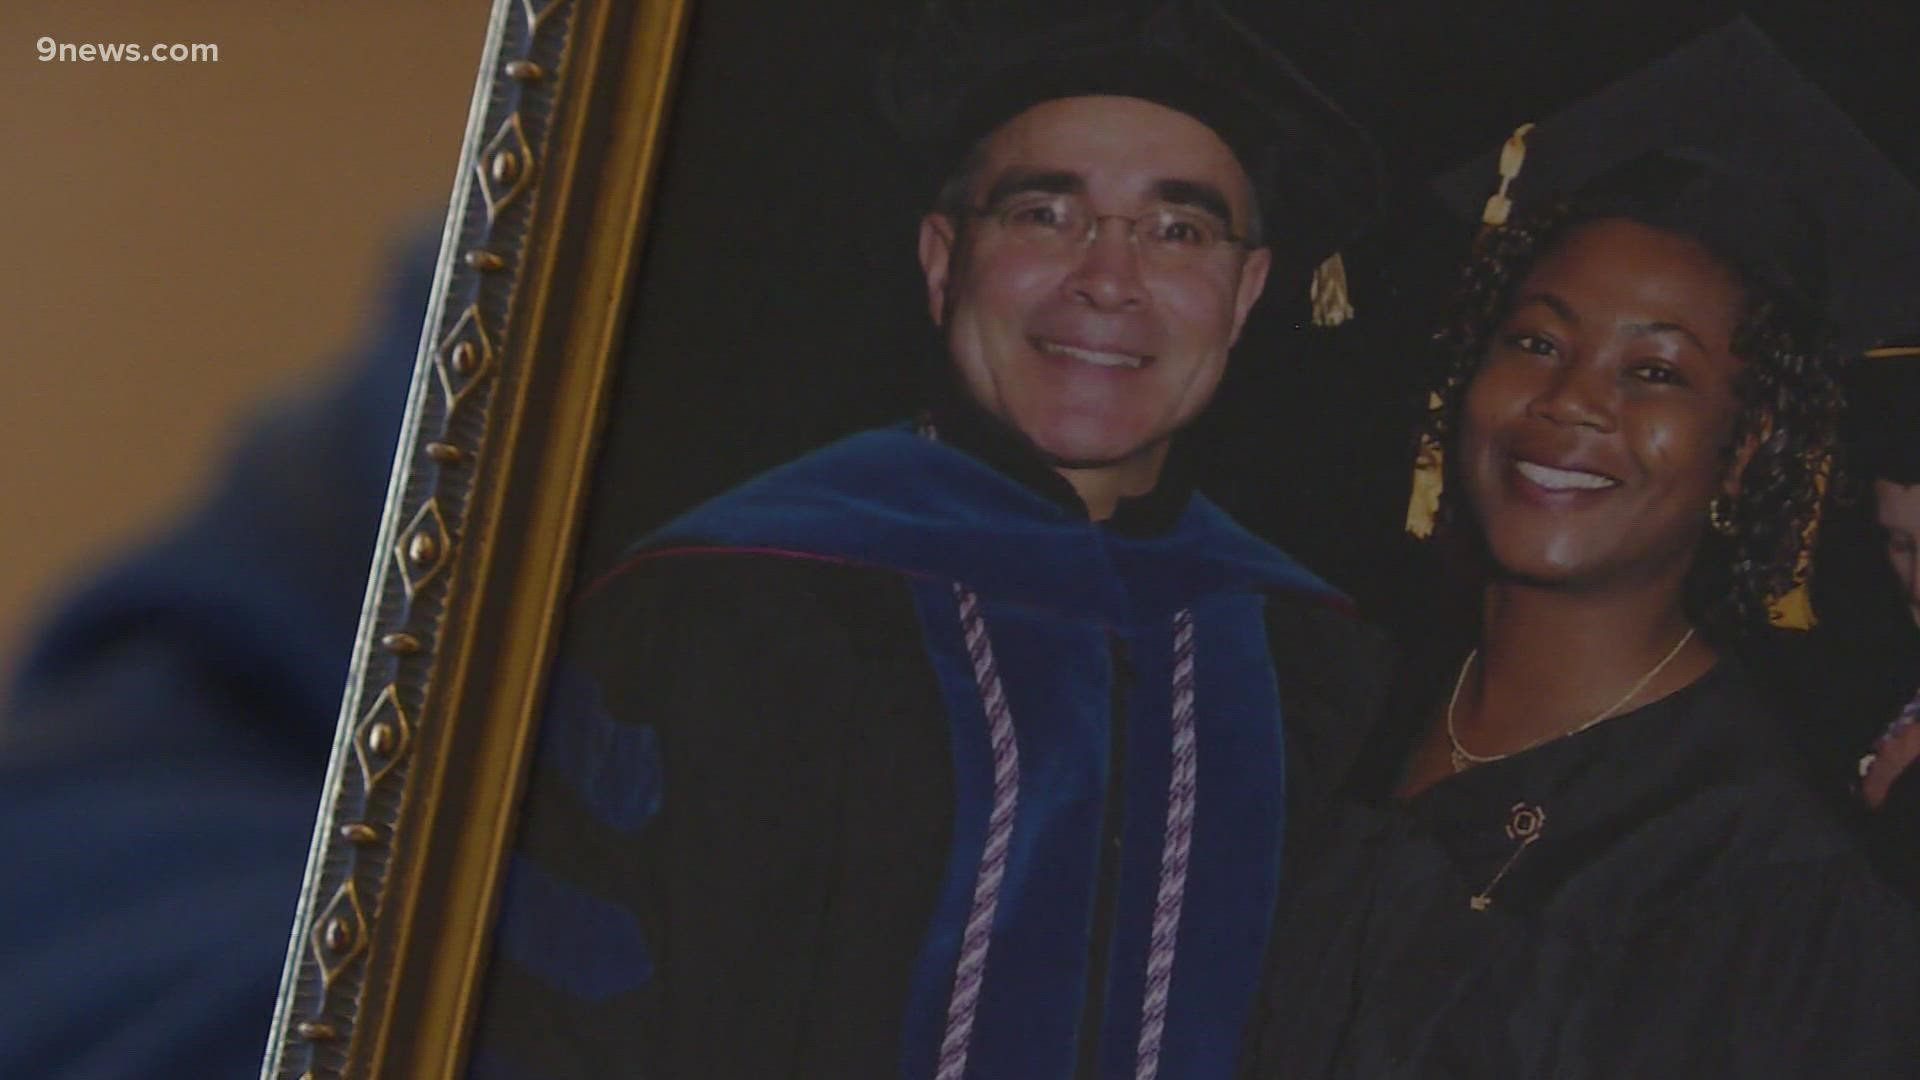 Dr. Elias Provencio-Vasquez hopes his own lived experiences will influence more diverse representation in the country's medical field and in higher education.